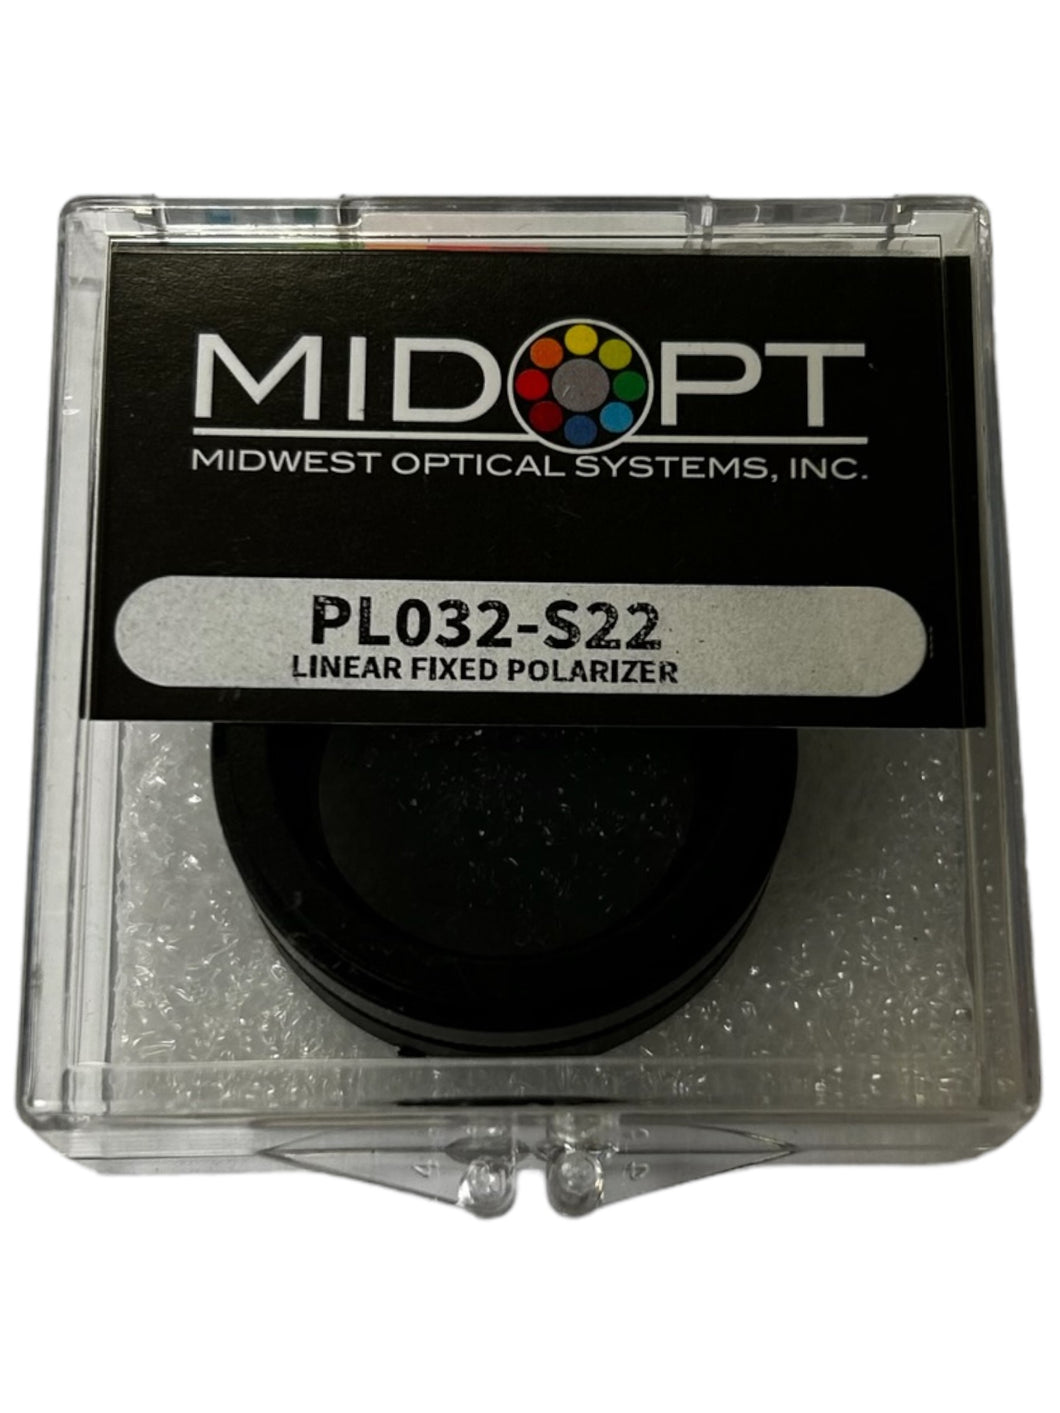 Midwest Optical Systems, Inc., PL032-S22, Linear Fixed Polarizer- NEW IN ORIGINAL PACKAGING - FreemanLiquidators - [product_description]